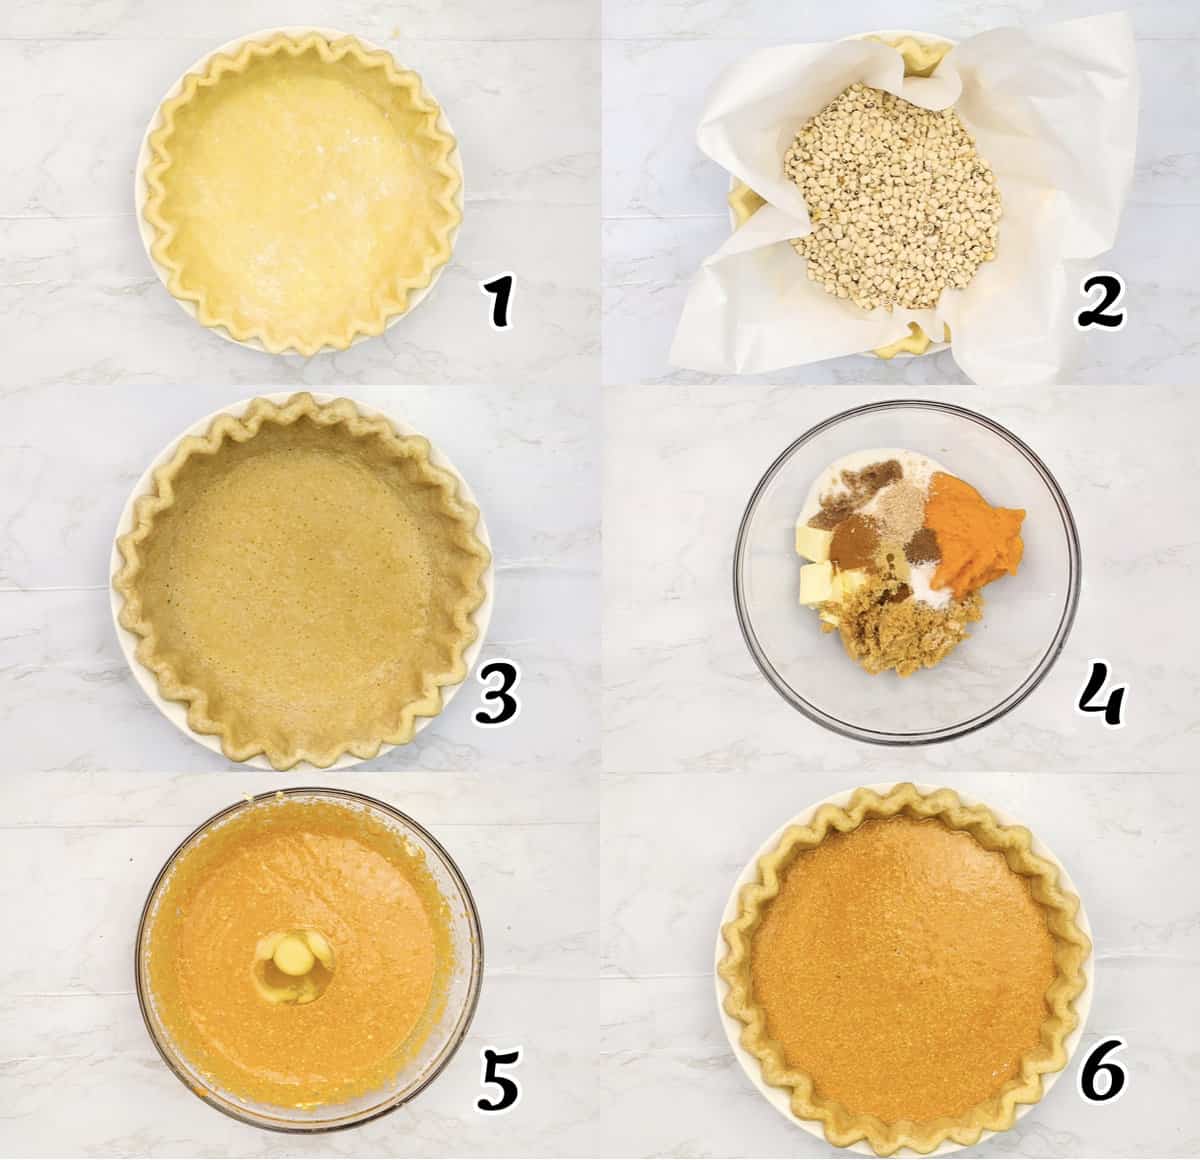 Make the crust and the filling, then assemble